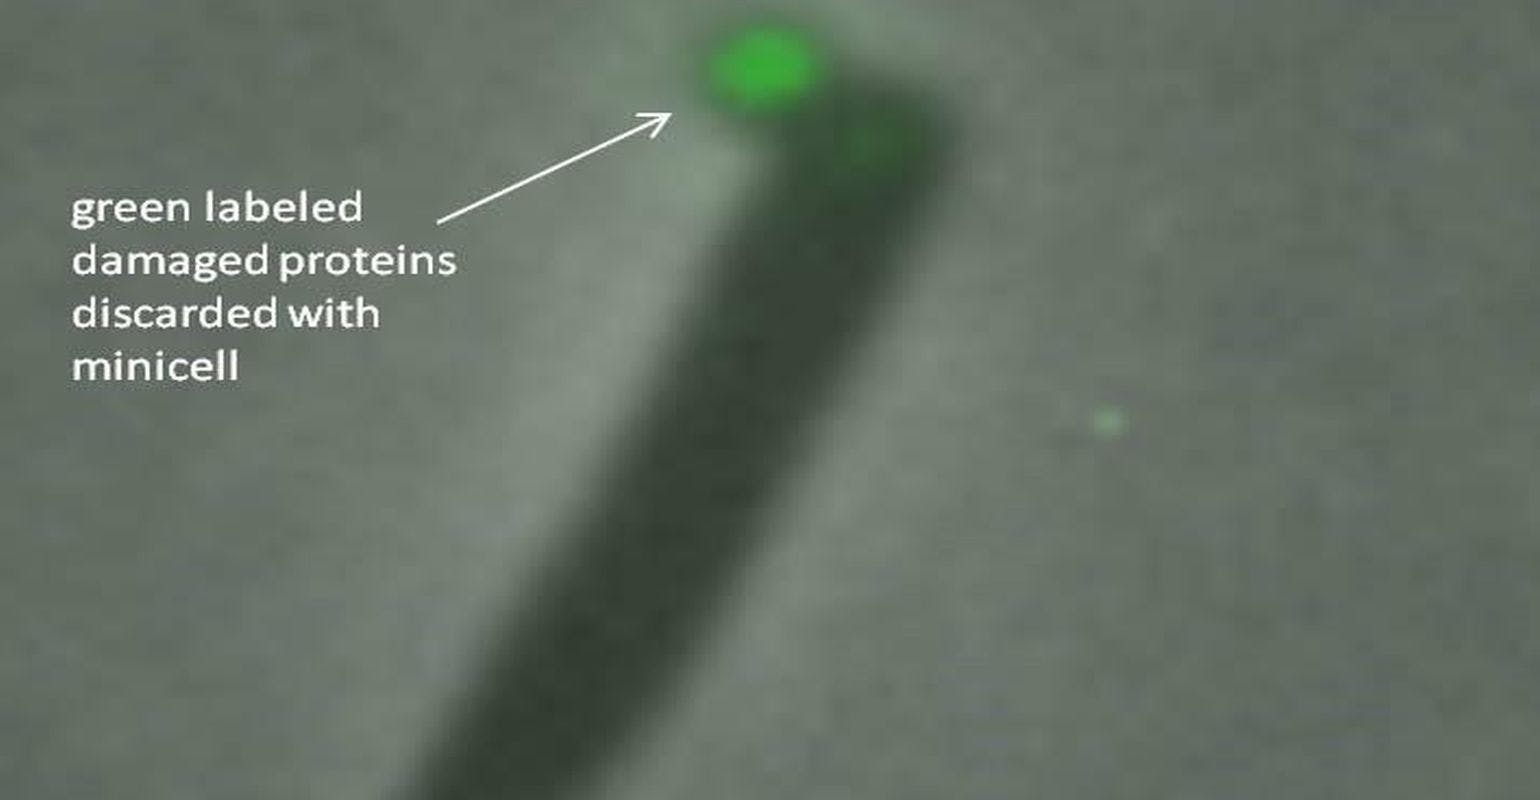 Bacteria Eject Trash to Survive